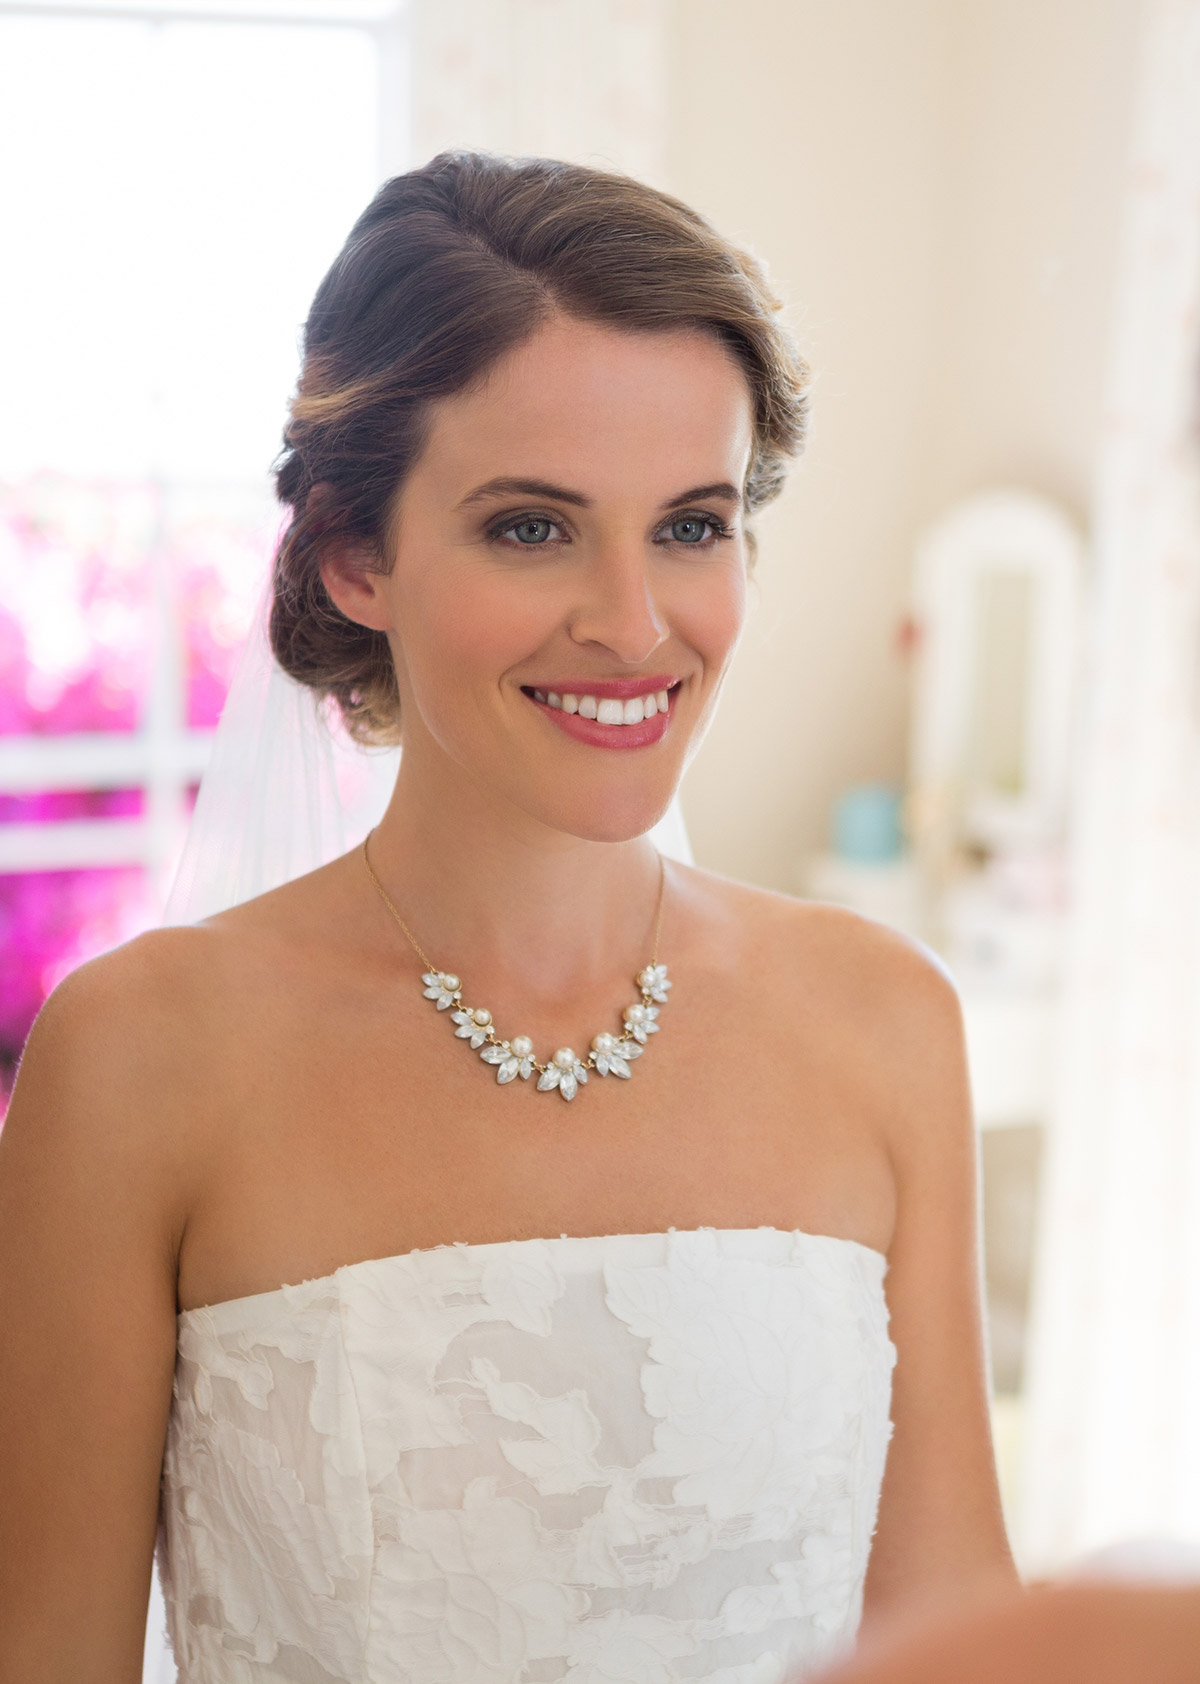 How To Style Different Wedding Dress Necklines With Jewellery